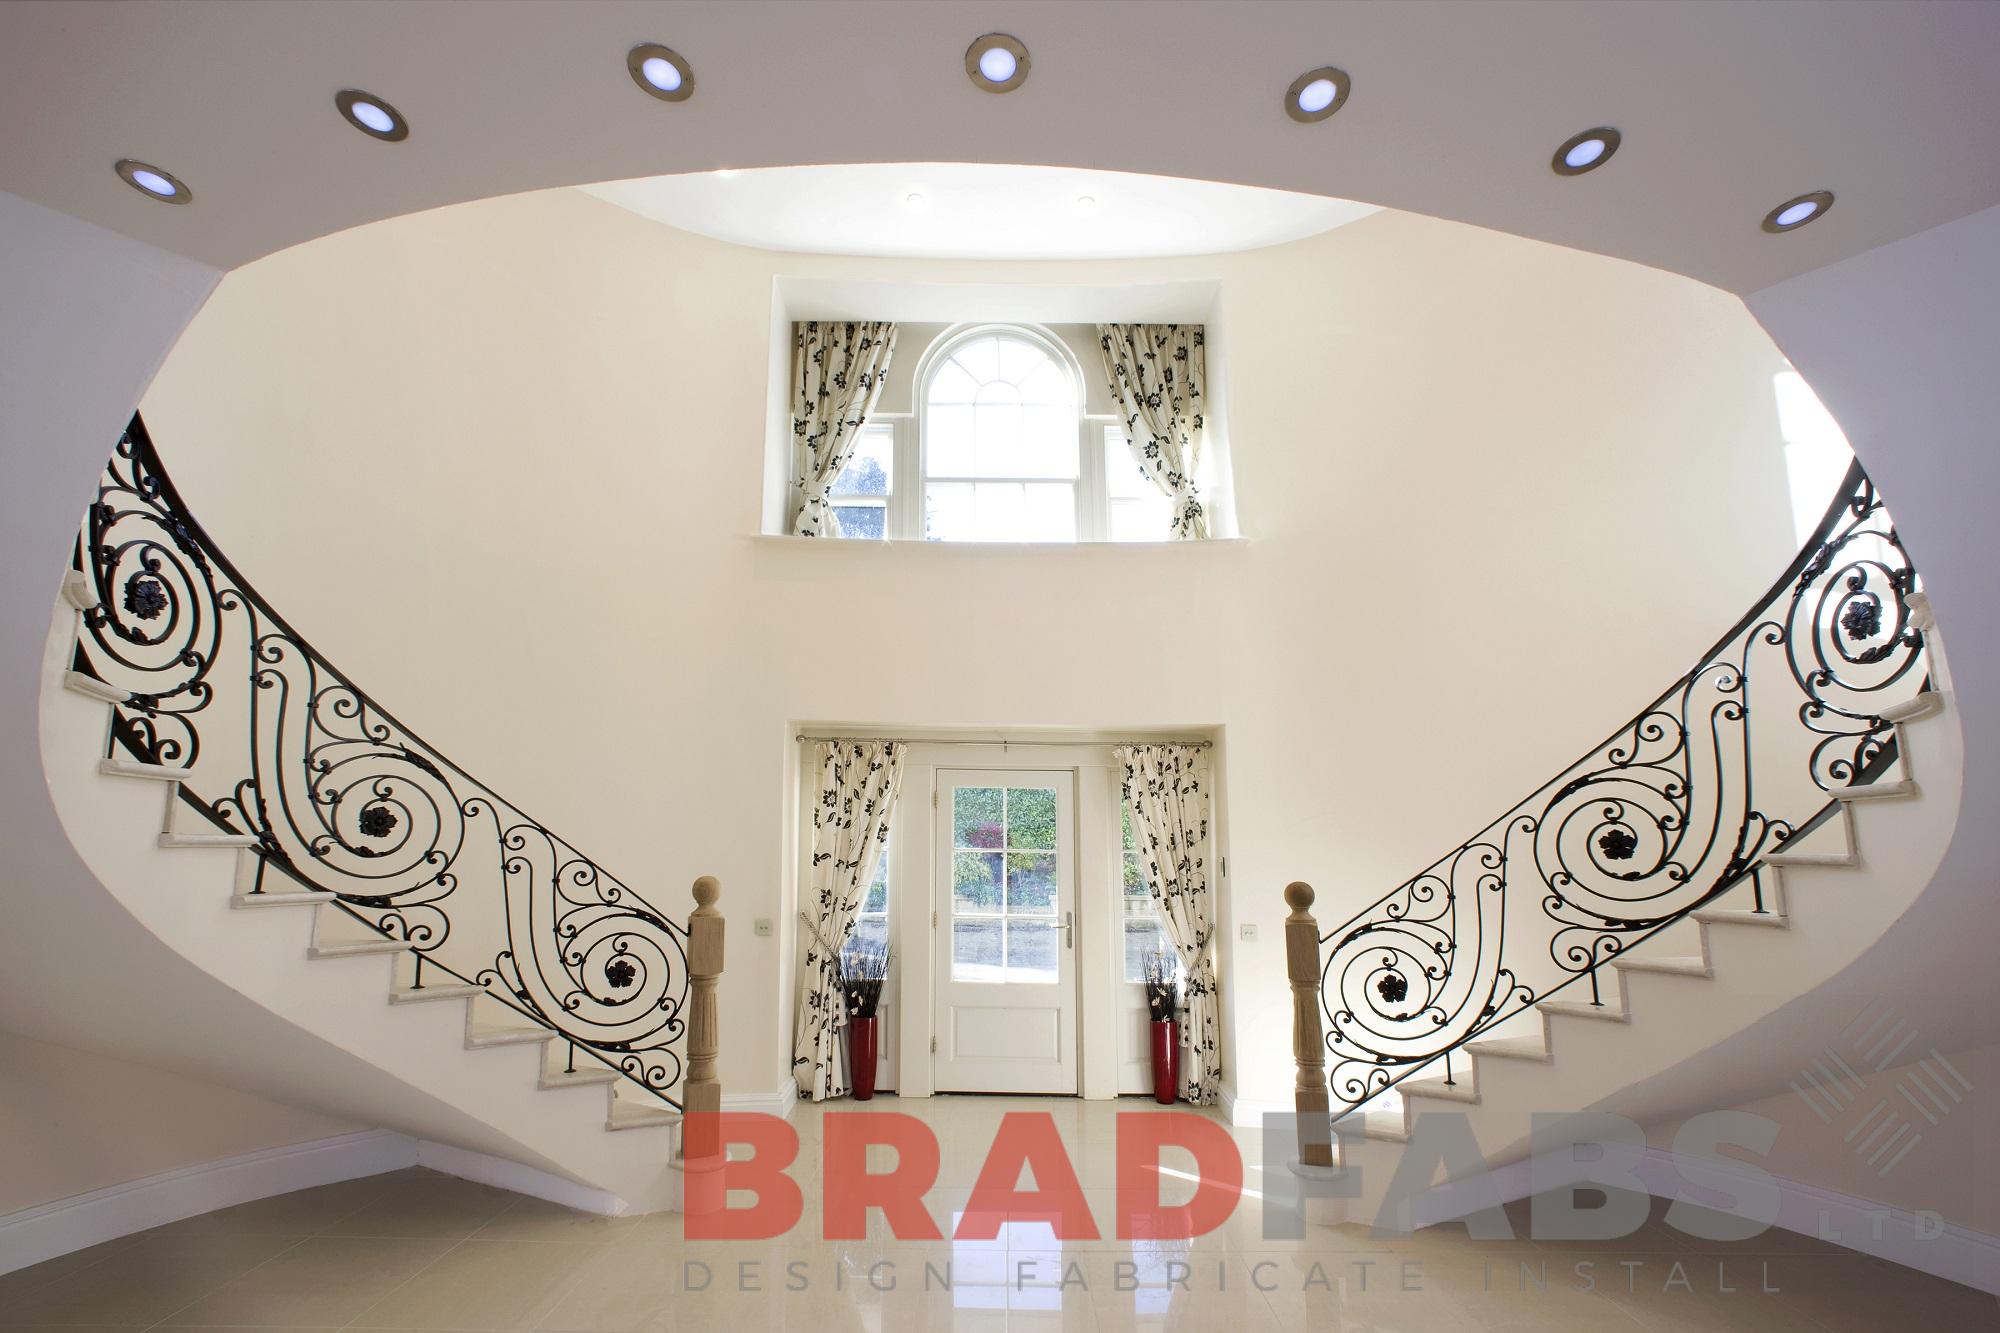 Curved high quality helix staircase with ornate balustrade